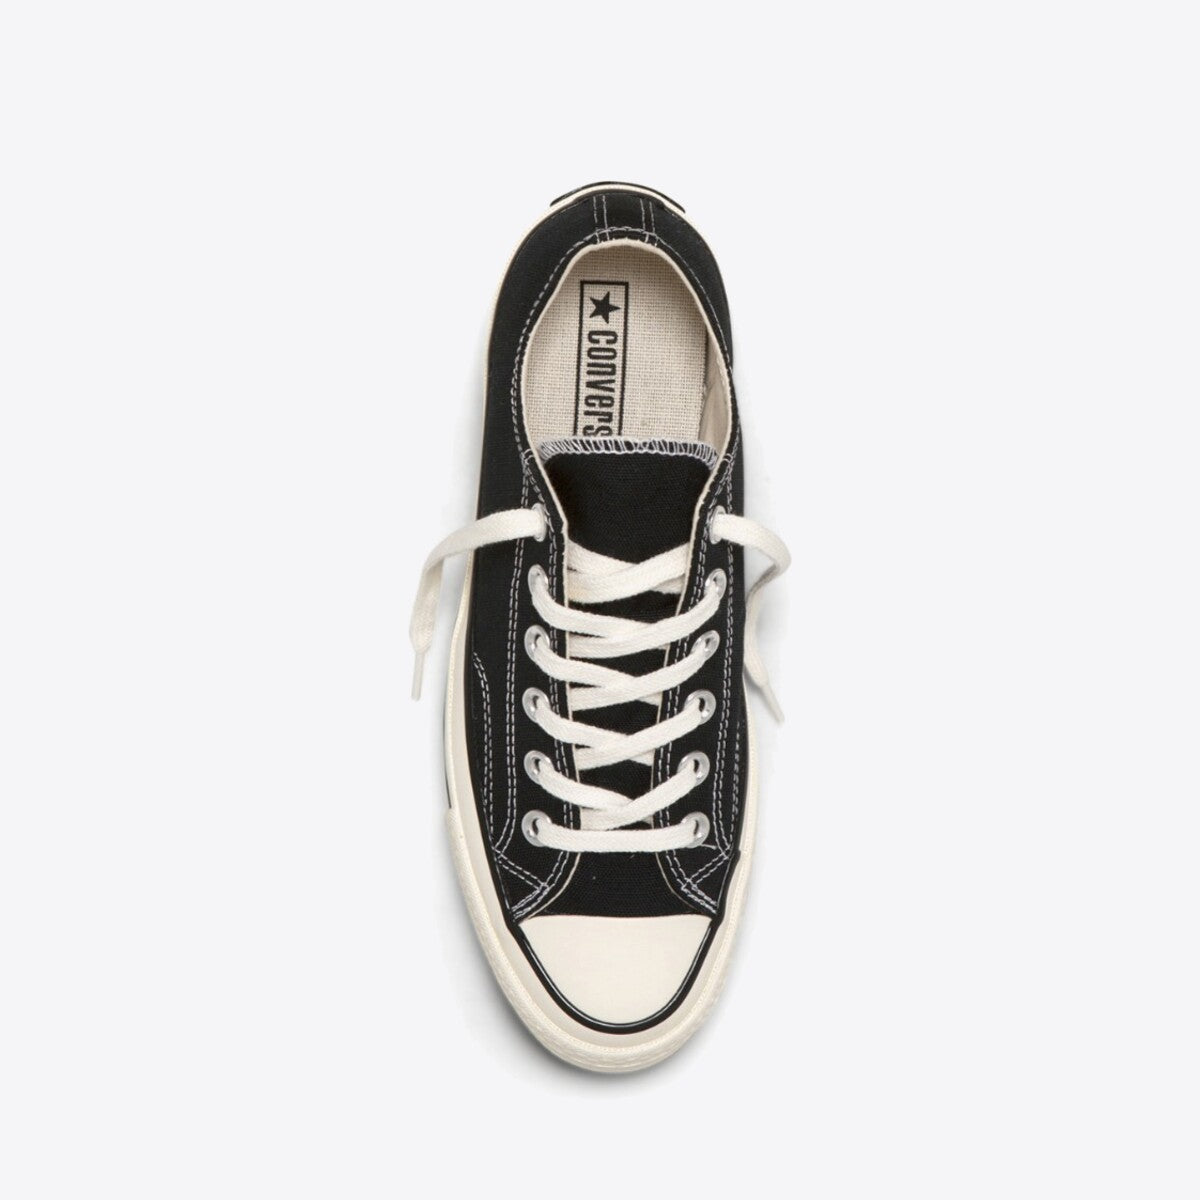 CONVERSE Chuck Taylor All Star 70 Canvas Low Black - Image 3